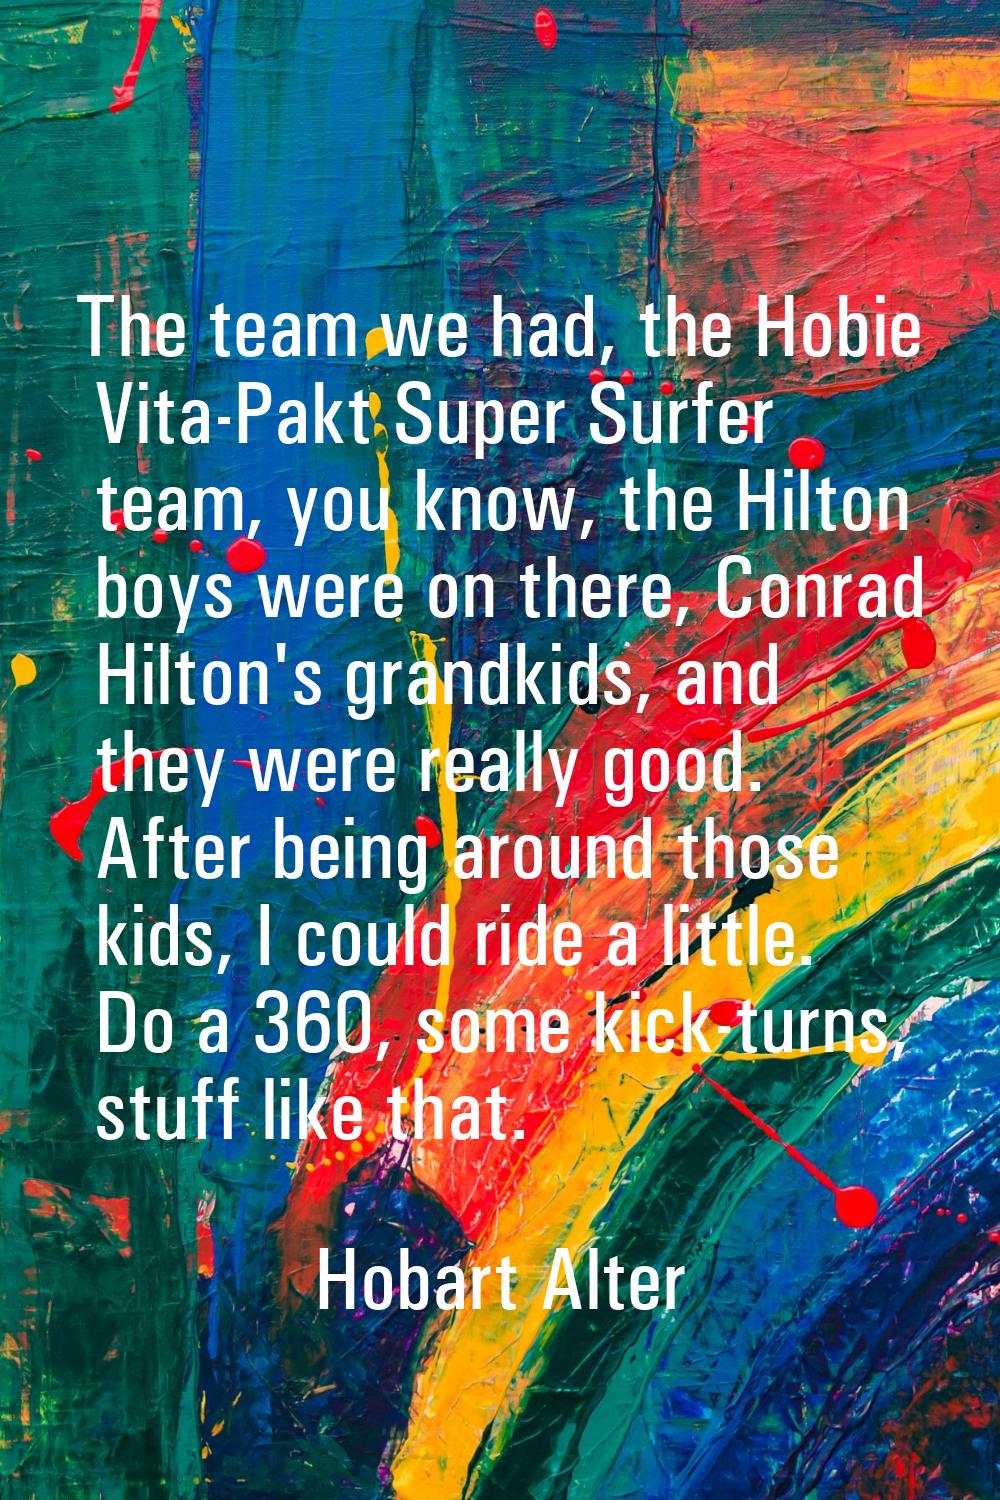 The team we had, the Hobie Vita-Pakt Super Surfer team, you know, the Hilton boys were on there, Co